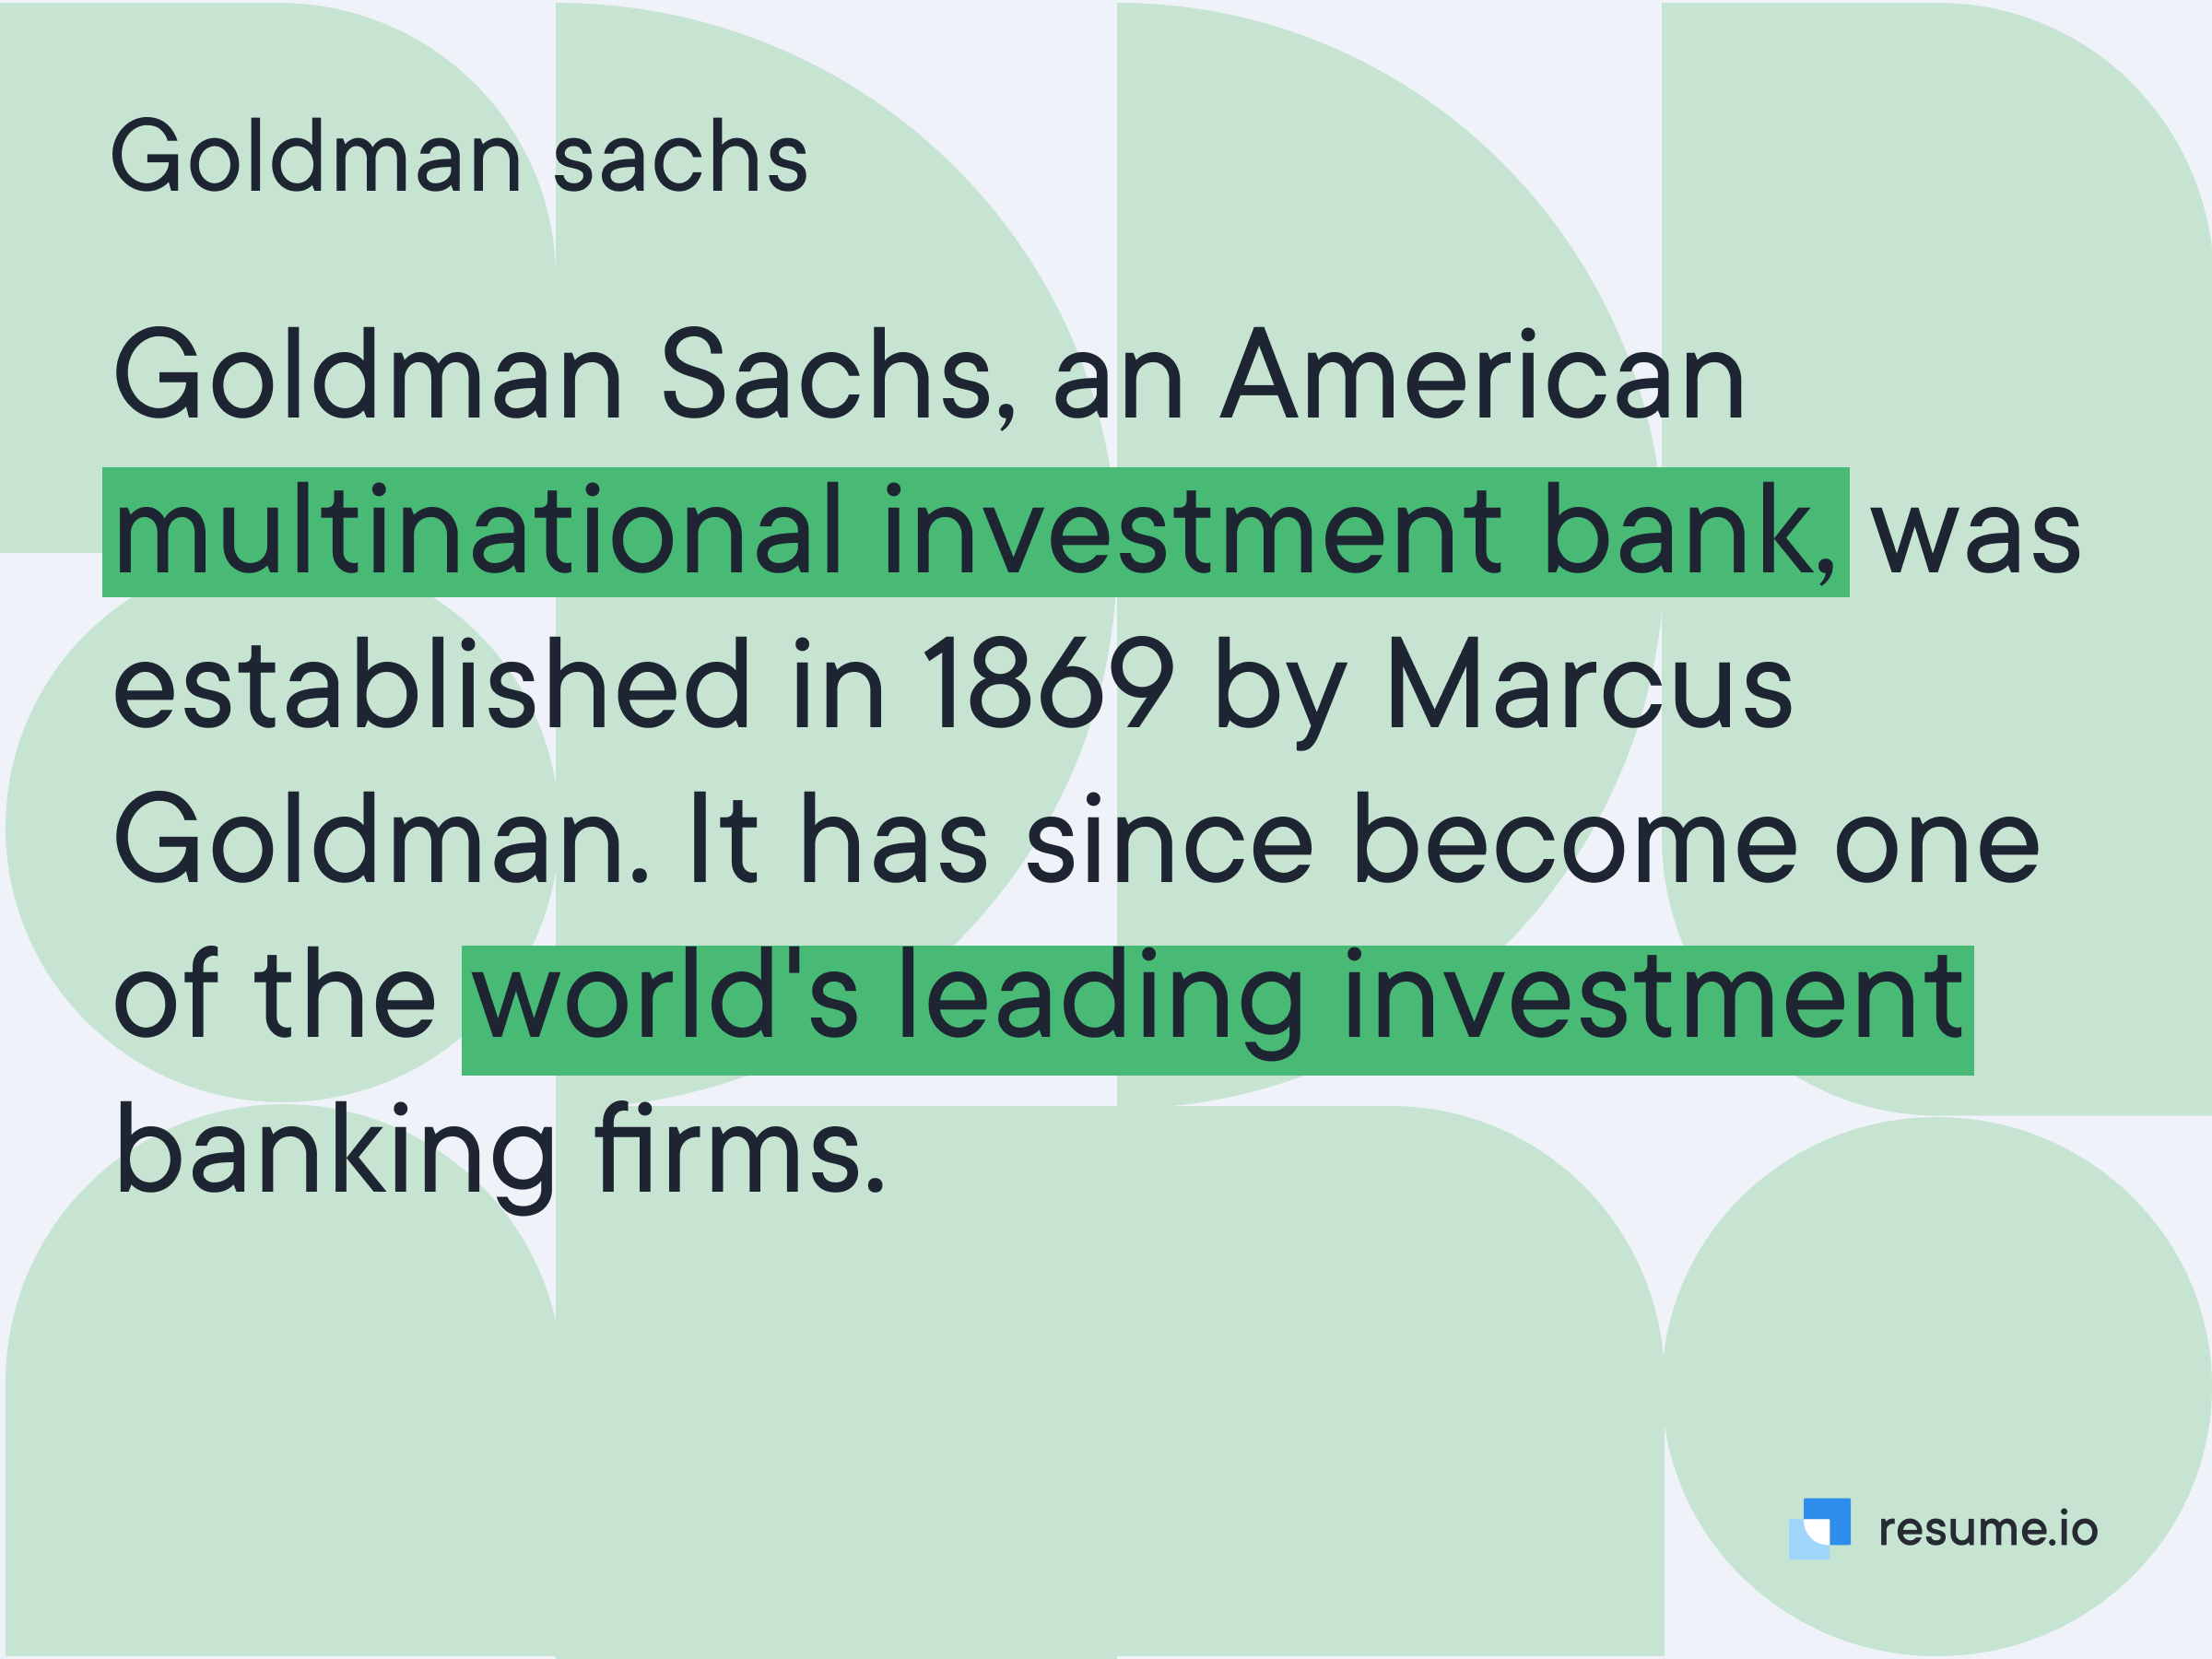 Goldman Sachs is one of the world's leading investment